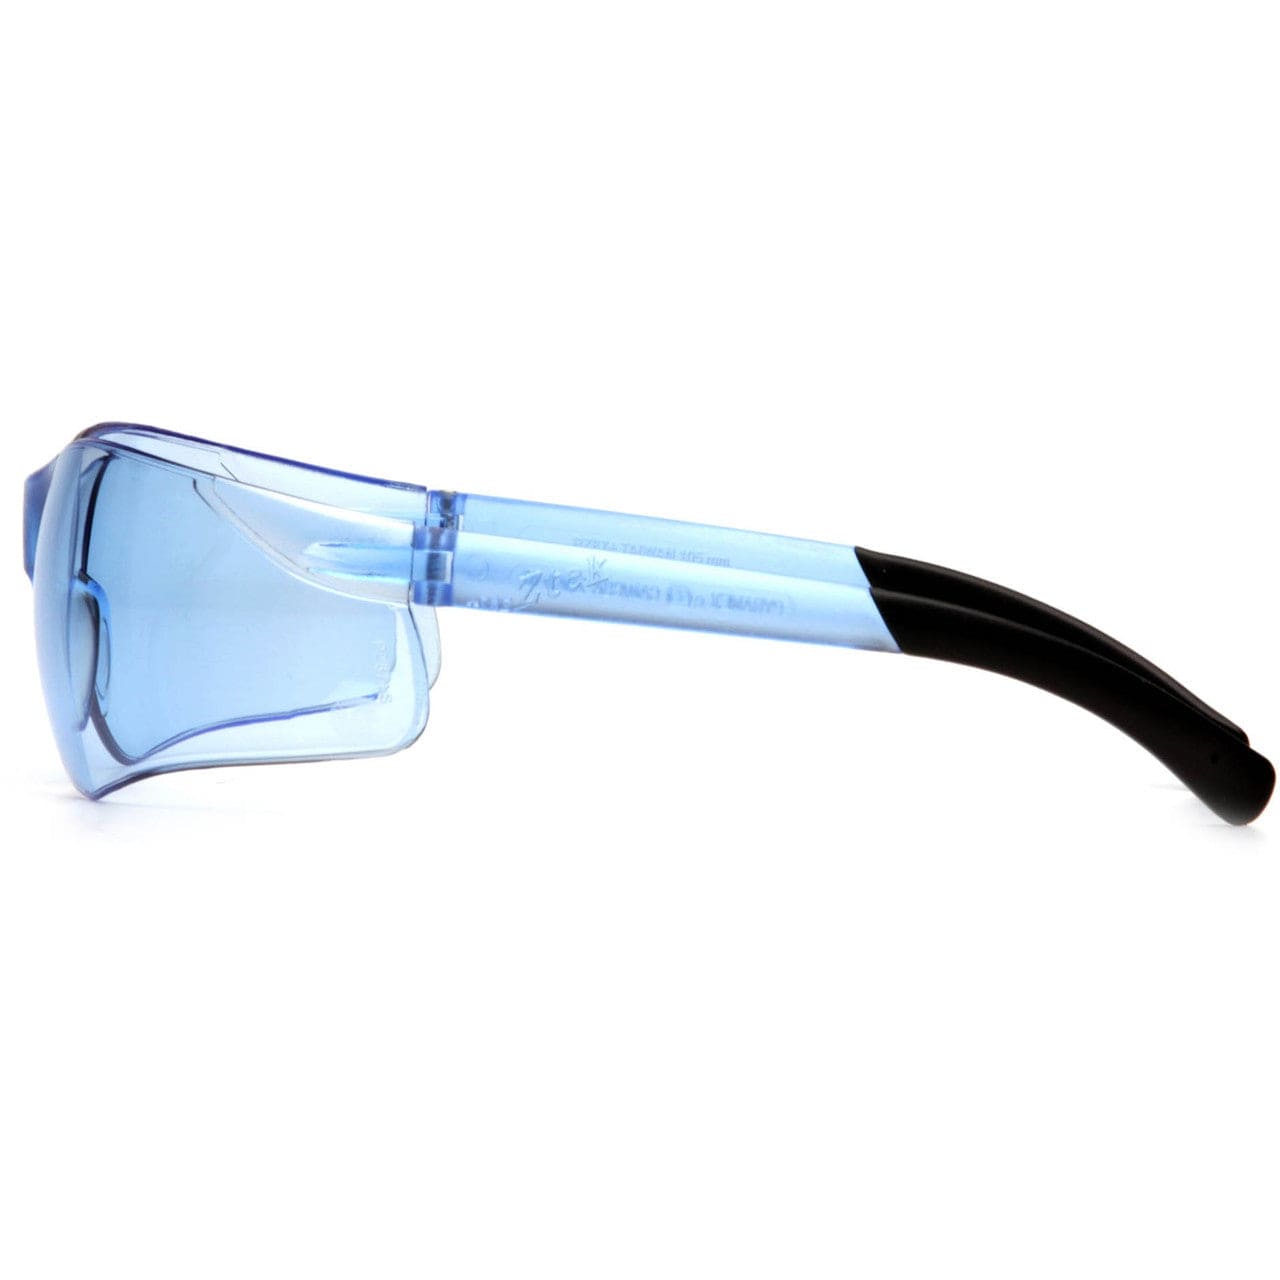 Pyramex Ztek Safety Glasses with Infinity Blue Lens S2560S Side View